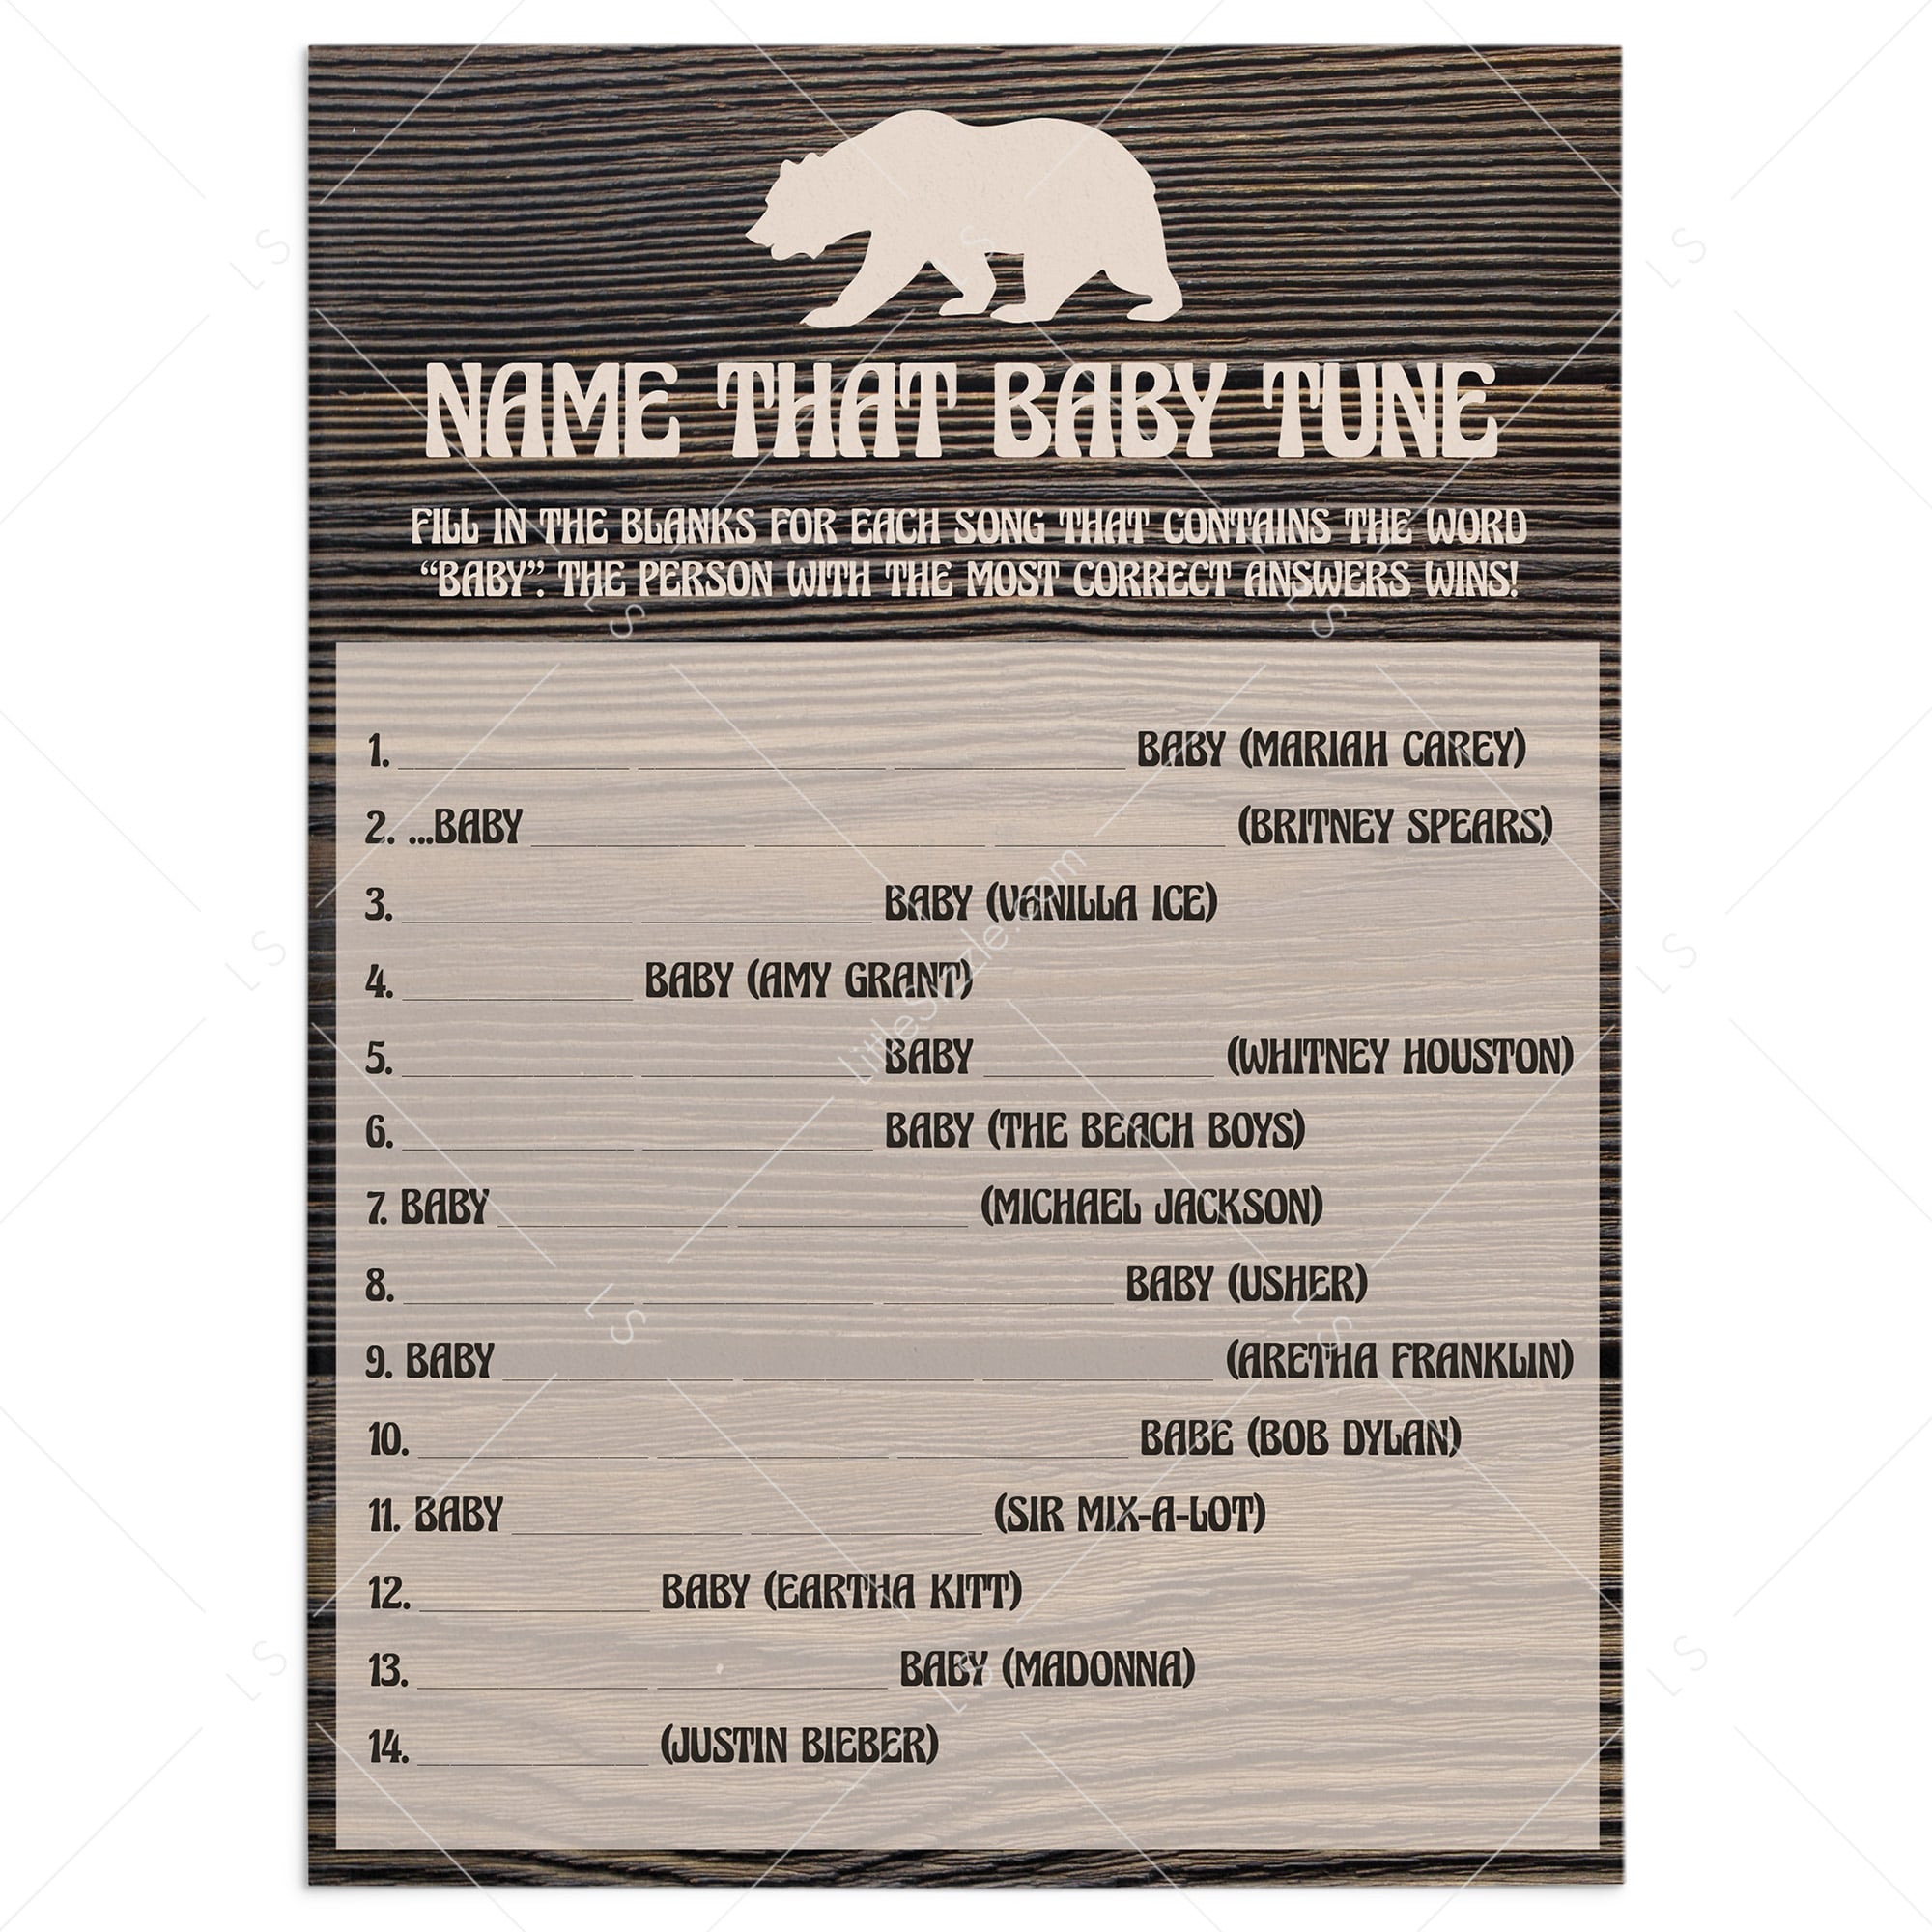 Bear Themed baby shower party games name that baby tune by LittleSizzle